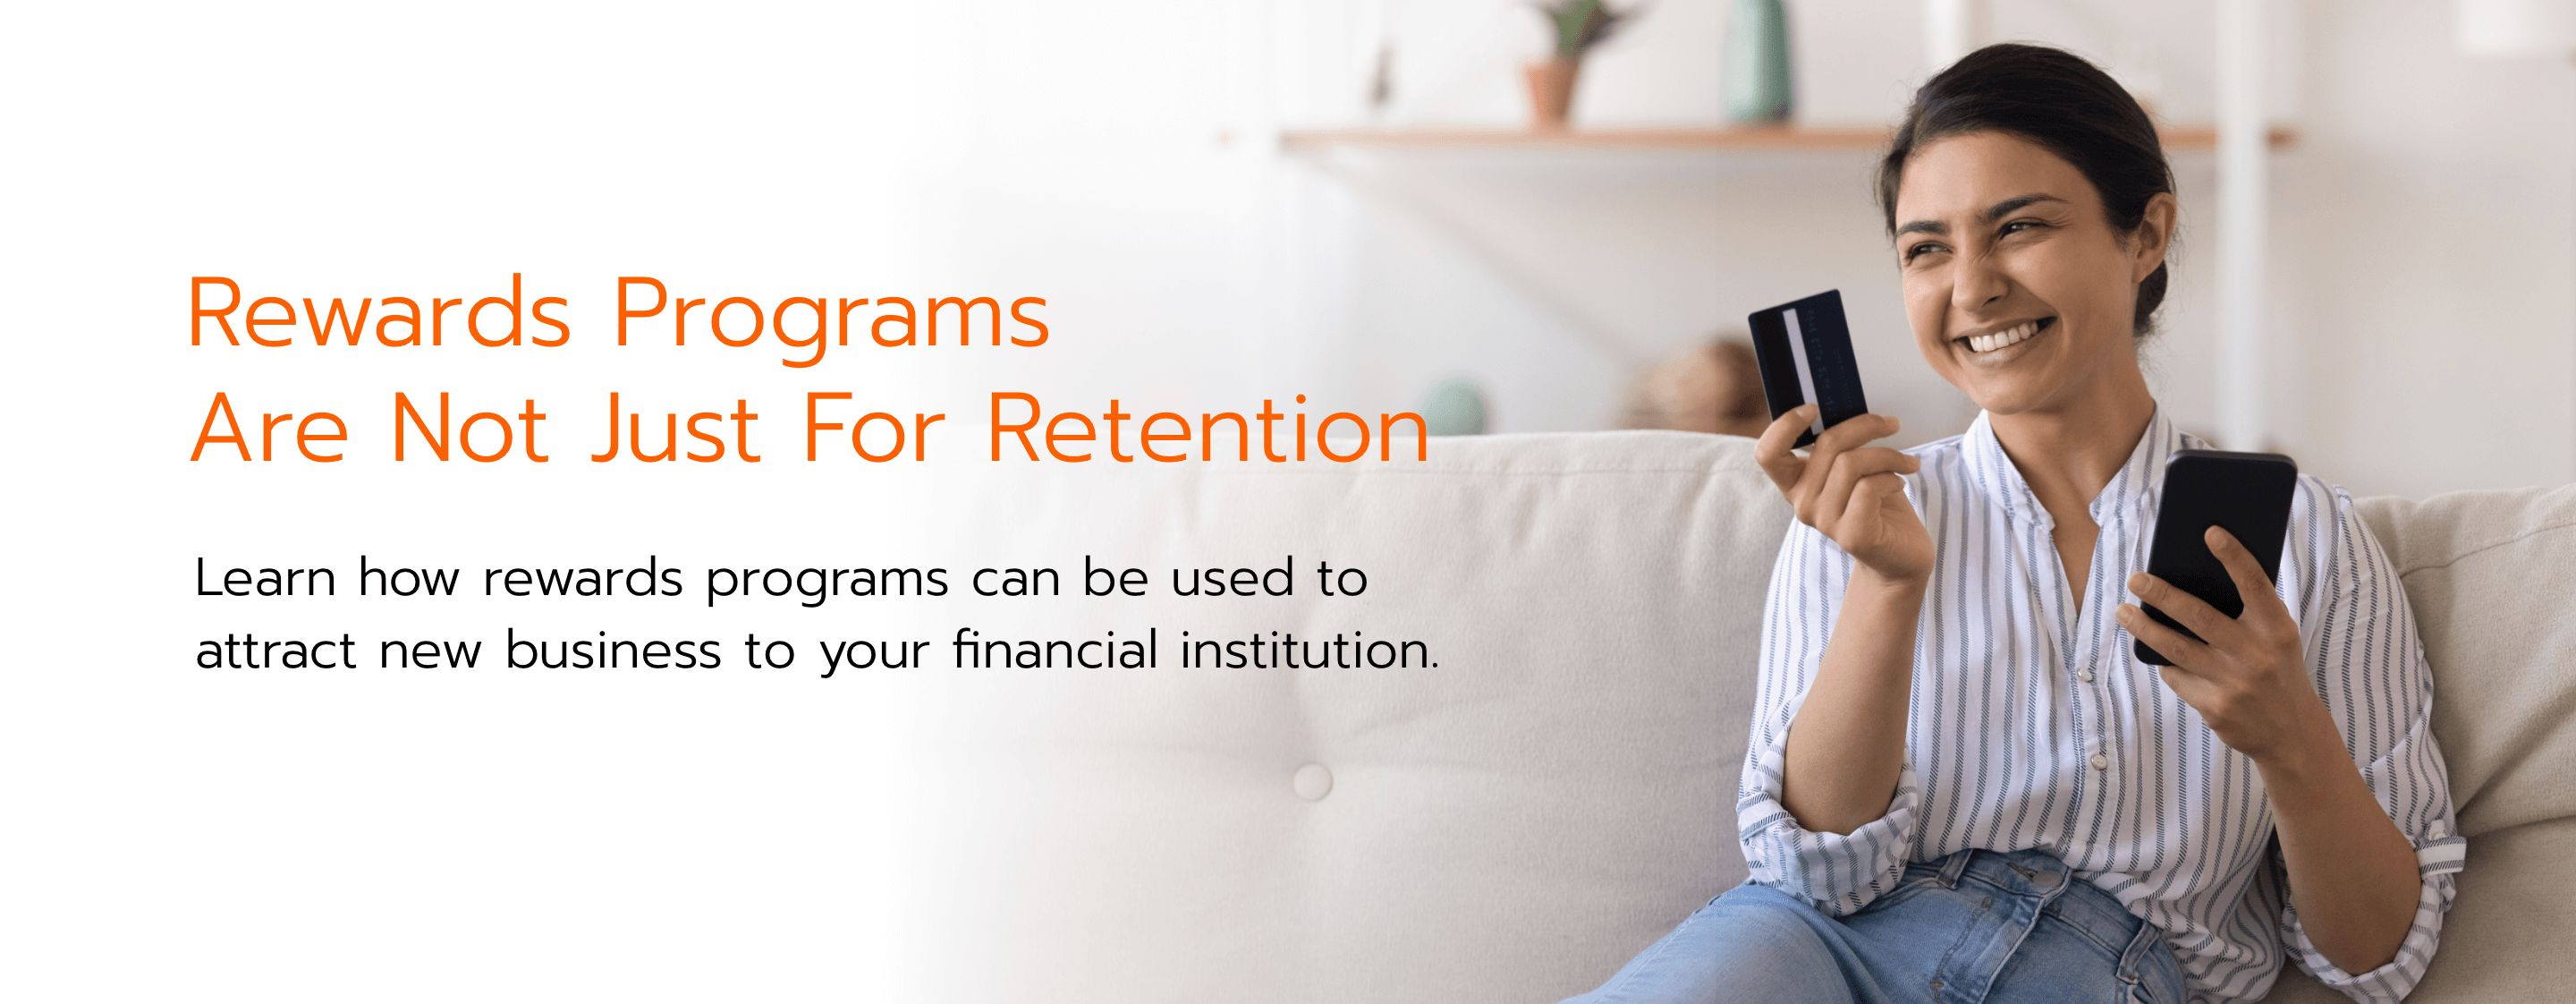 Rewards Programs Are Not Just For Retention Rewards Programs 
Are Not Just For Retention